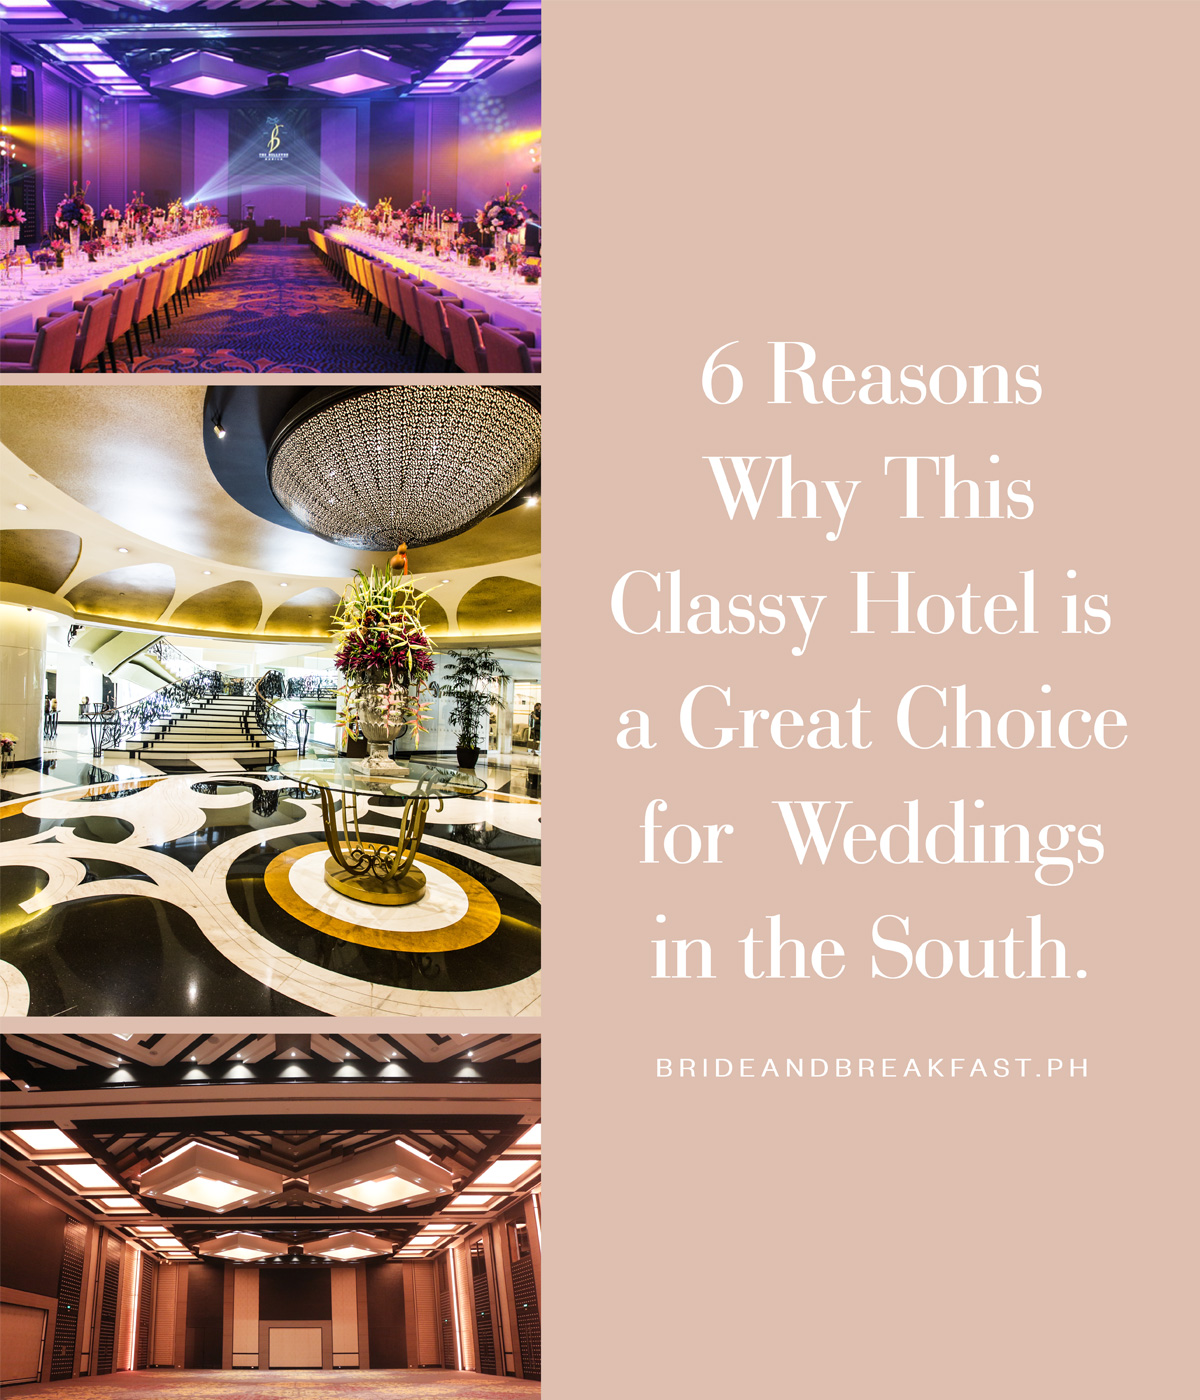 6 Reasons Why This Classy Hotel is a Great Choice for Weddings in the South